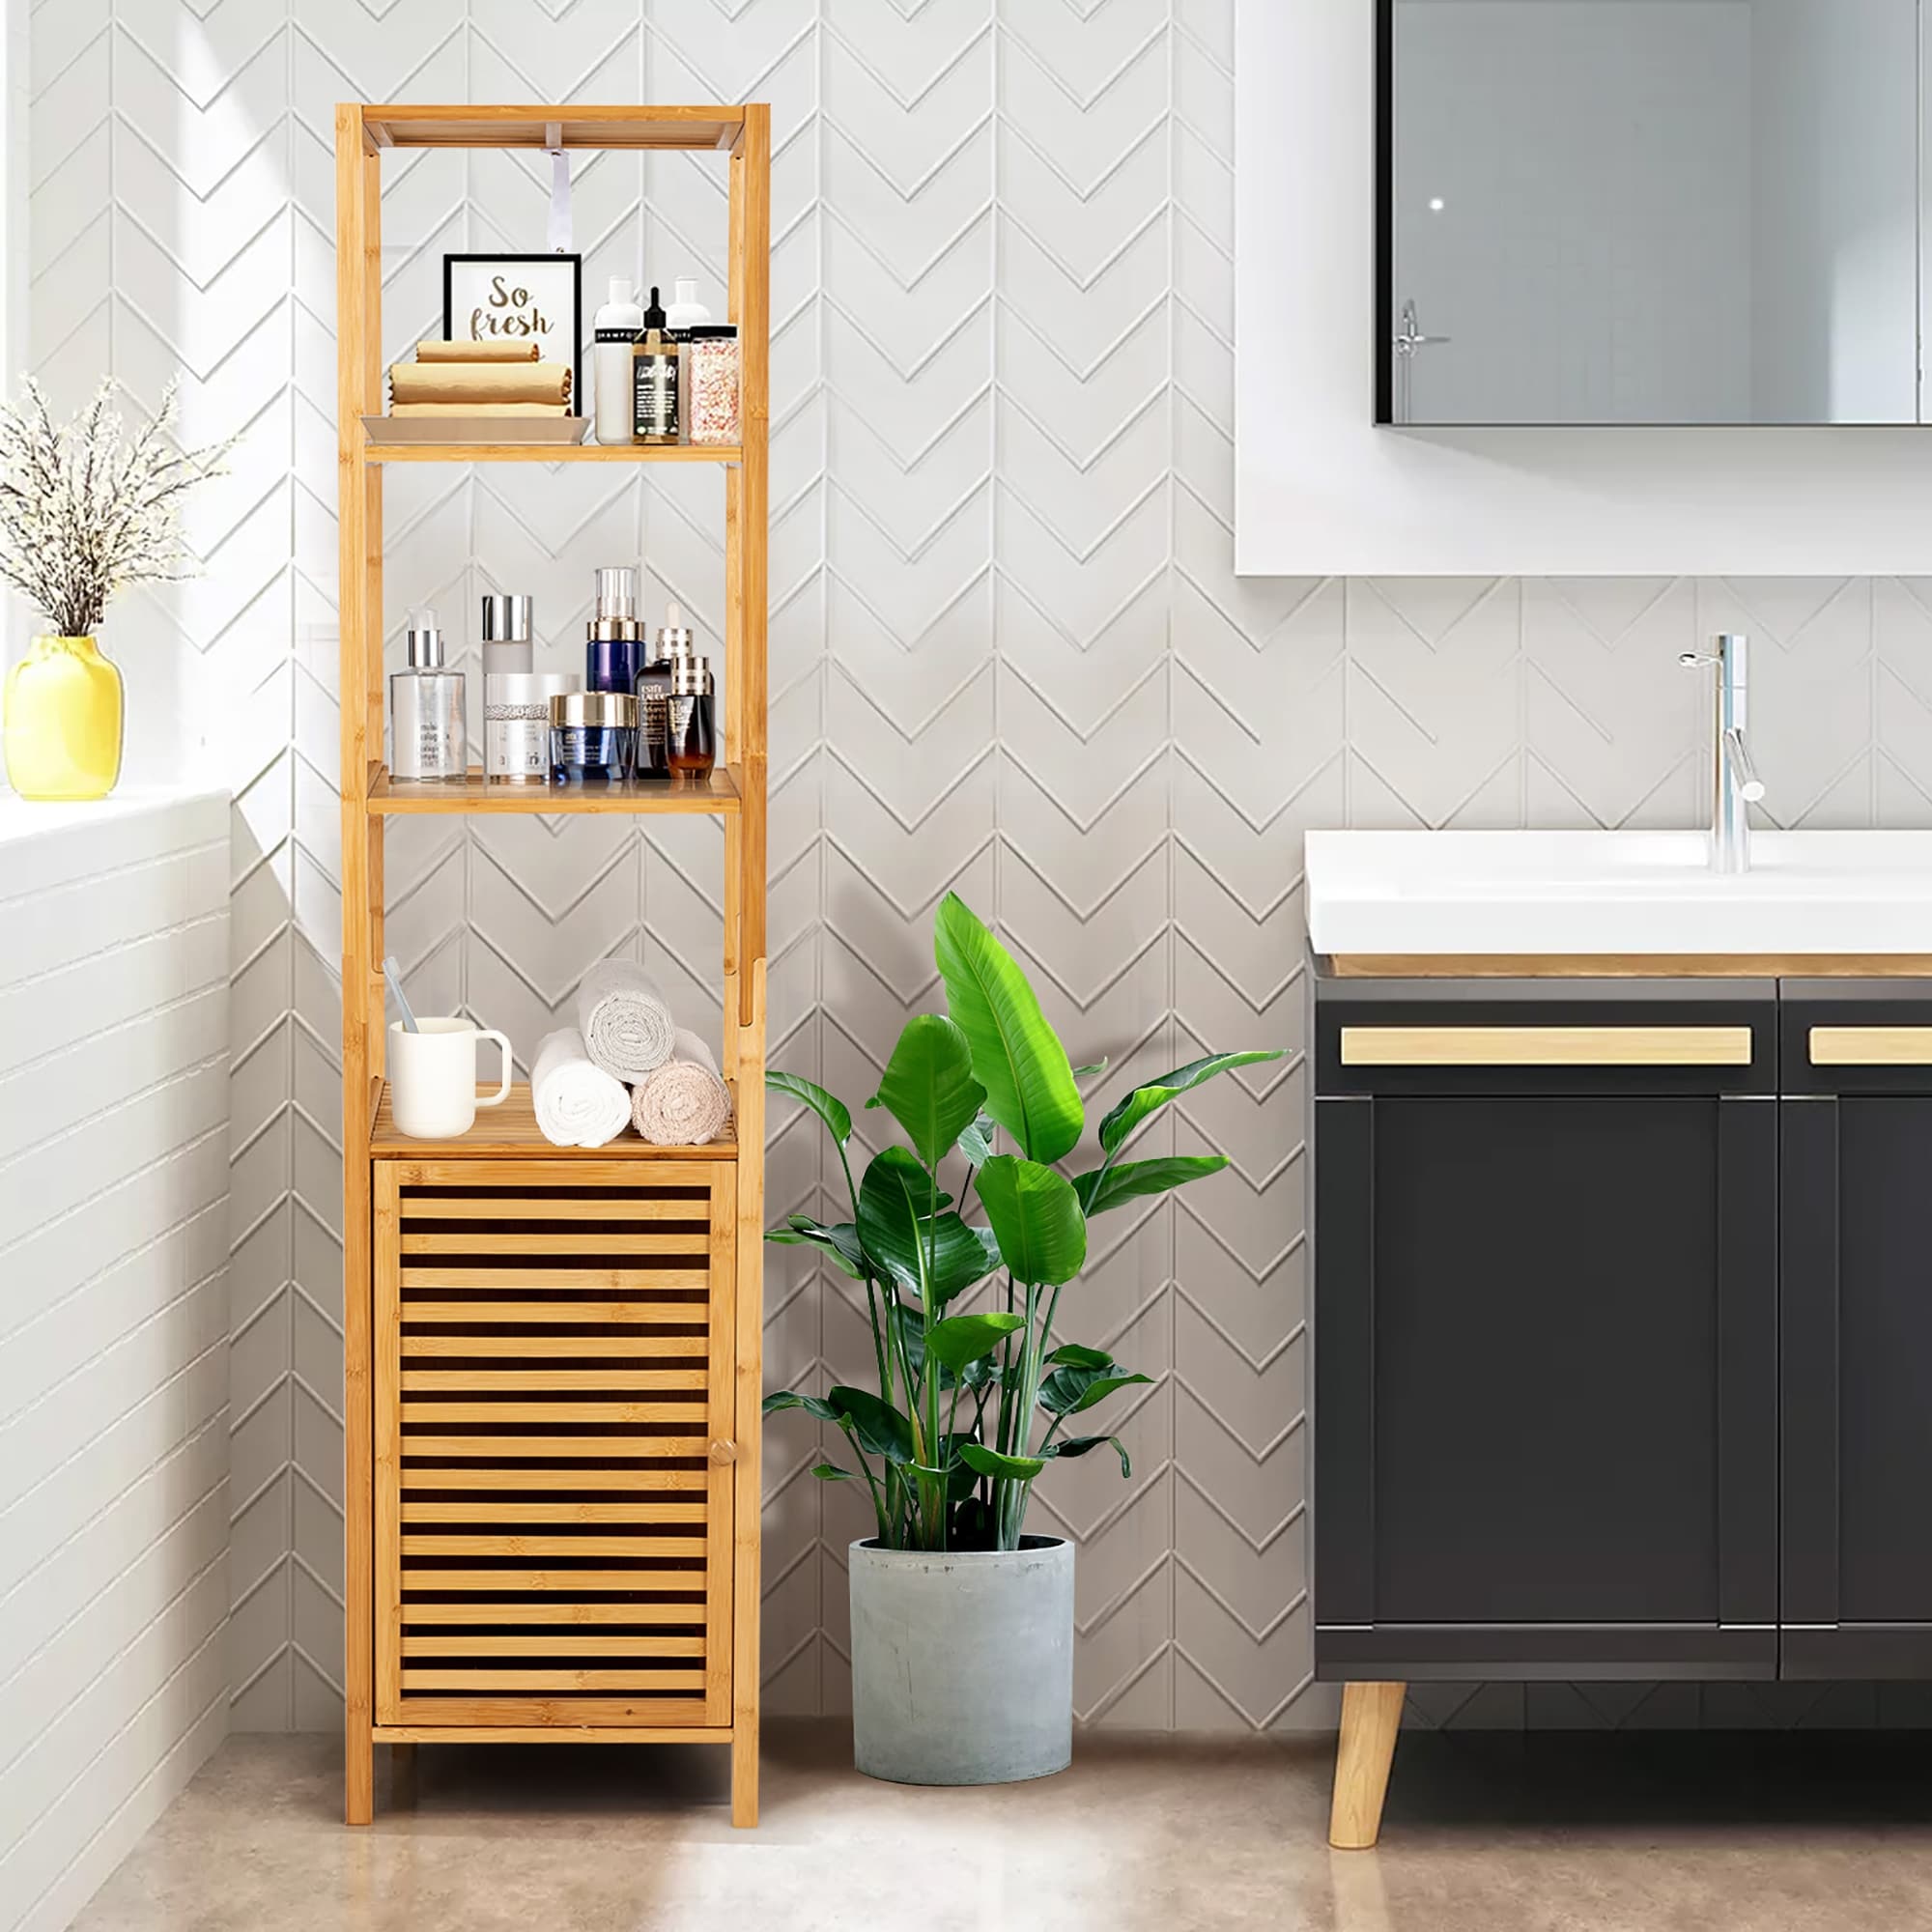 https://ak1.ostkcdn.com/images/products/is/images/direct/65c9894766fa72964909a2d49e1273cde71b77c3/4-Tiers-Bamboo-Bathroom-Storage-Floor-Cabinet-Tower-Corner-Rack.jpg